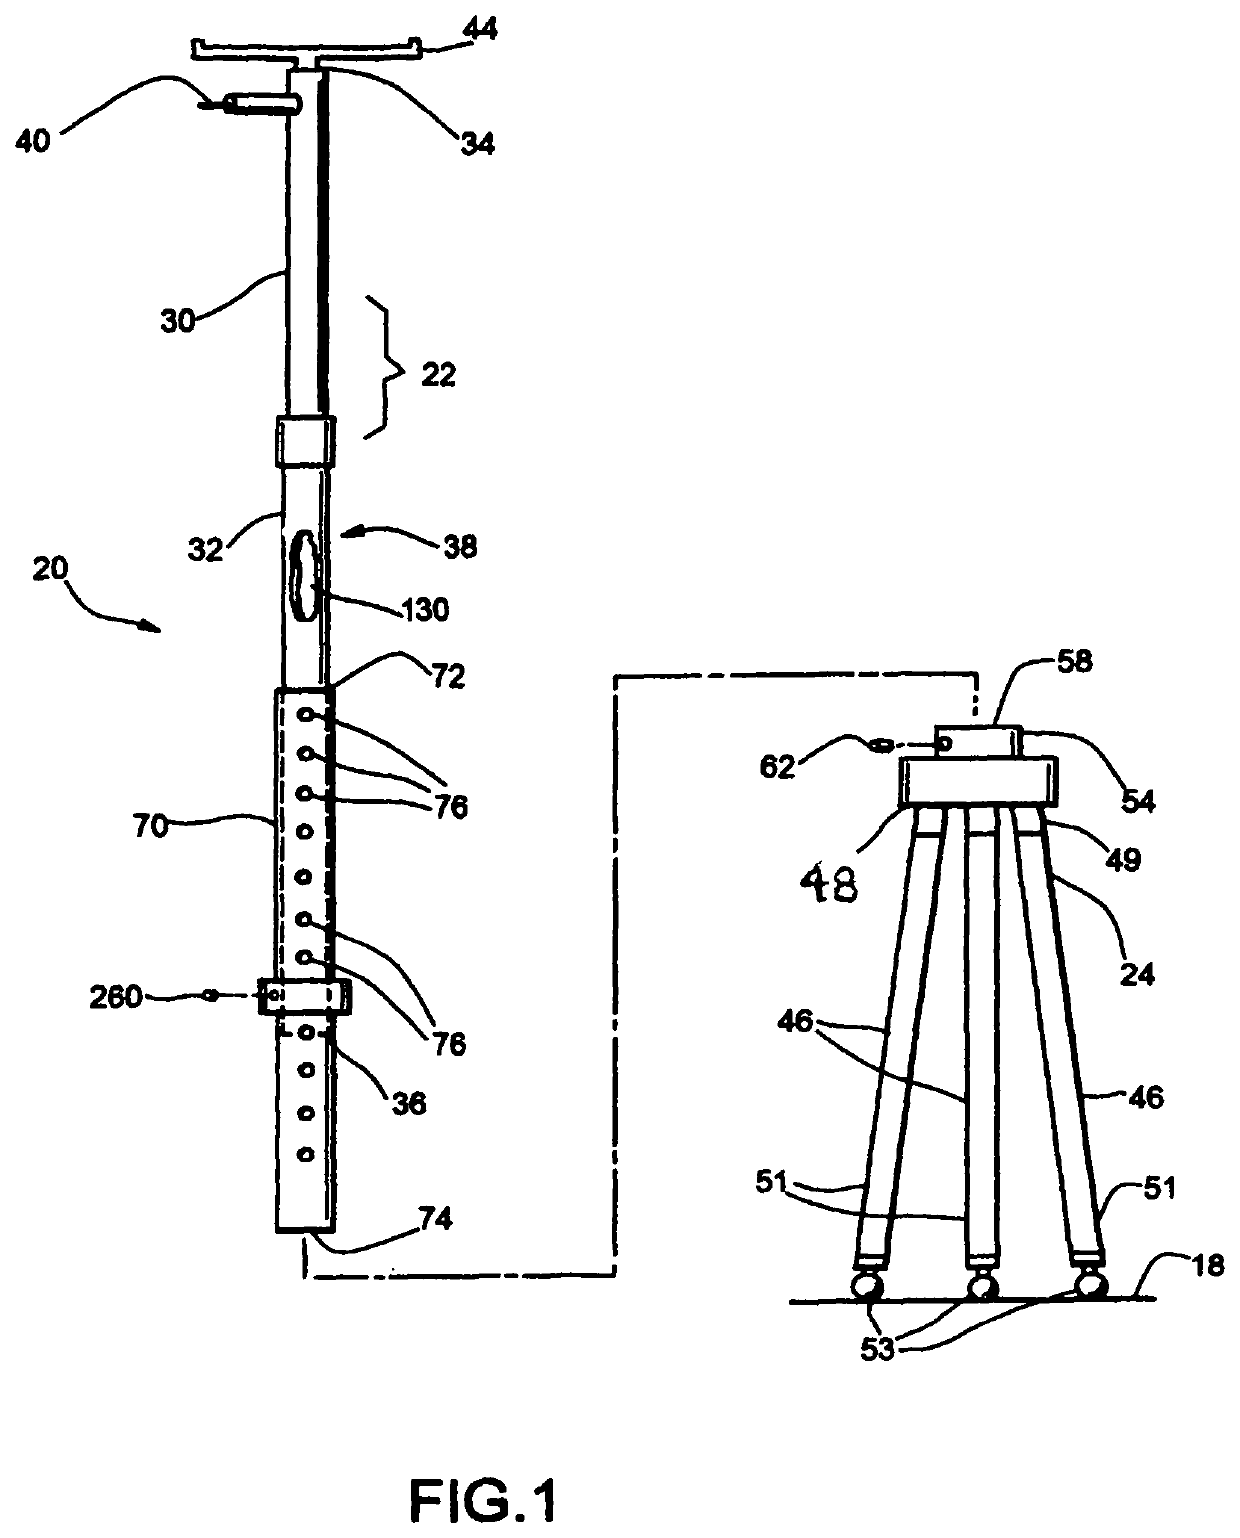 Elongated support apparatus for lifting an item to or supporting an item in an elevated condition